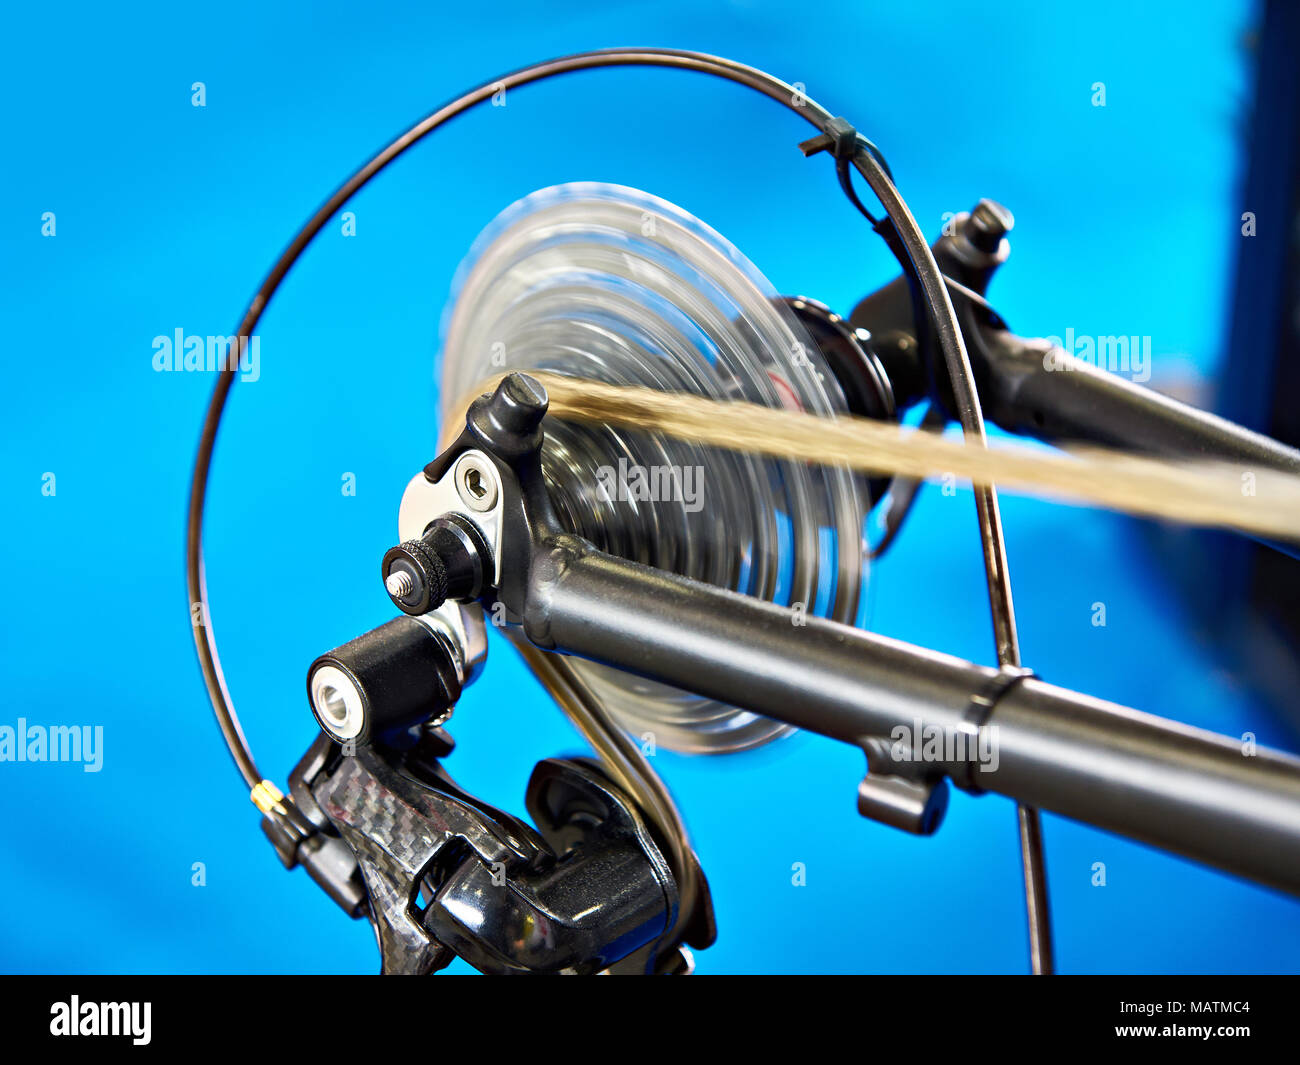 Carriage with chain rear wheel sports mountain bike on move Stock Photo